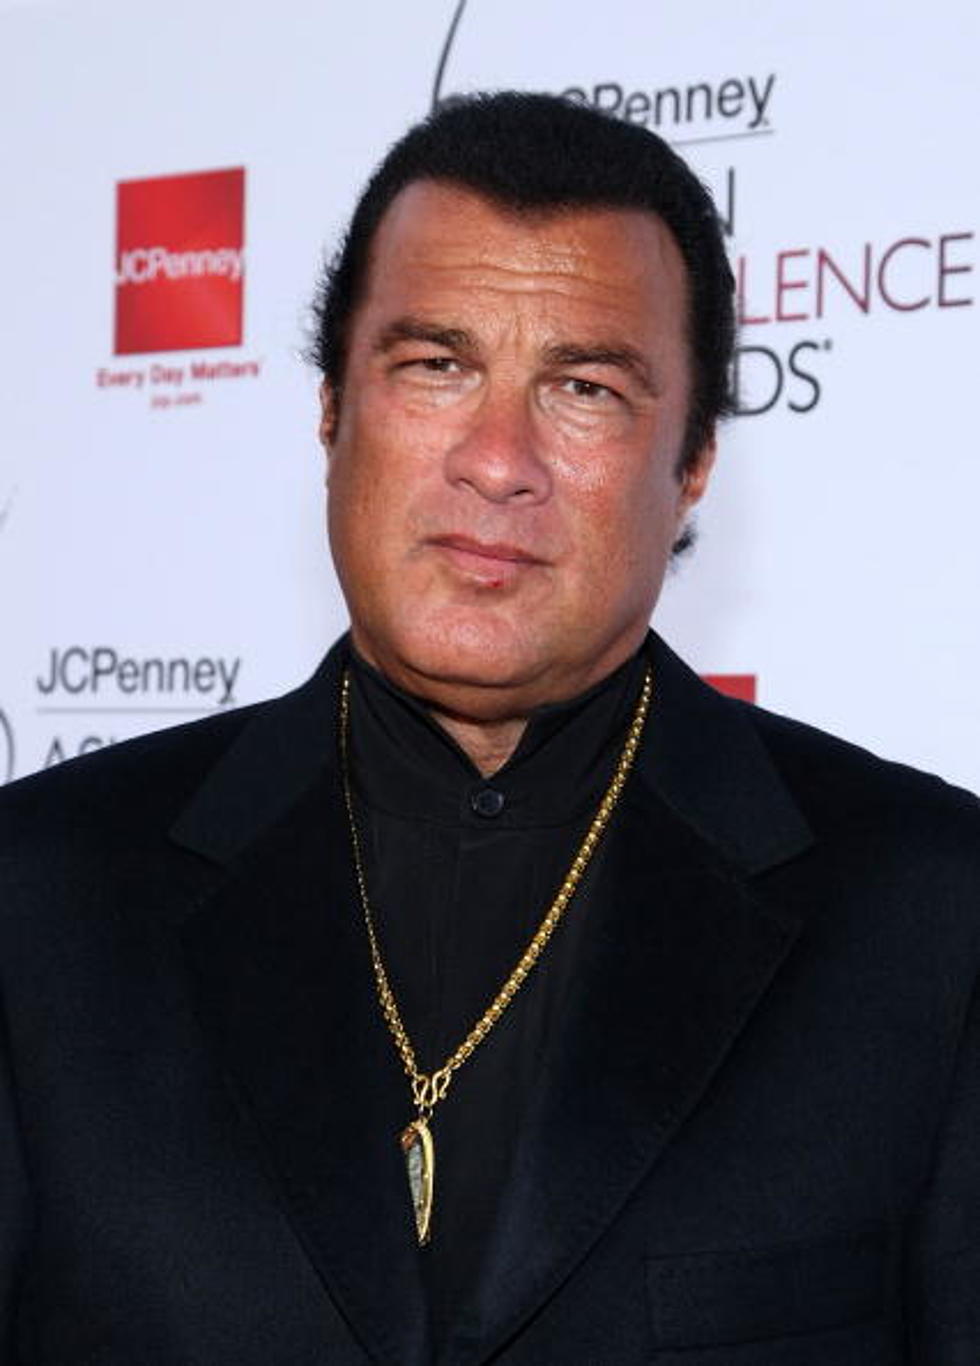 Steven Seagal Kills A Puppy And Now Faces Legal Threats After A Cockfight Raid On His Reality Show